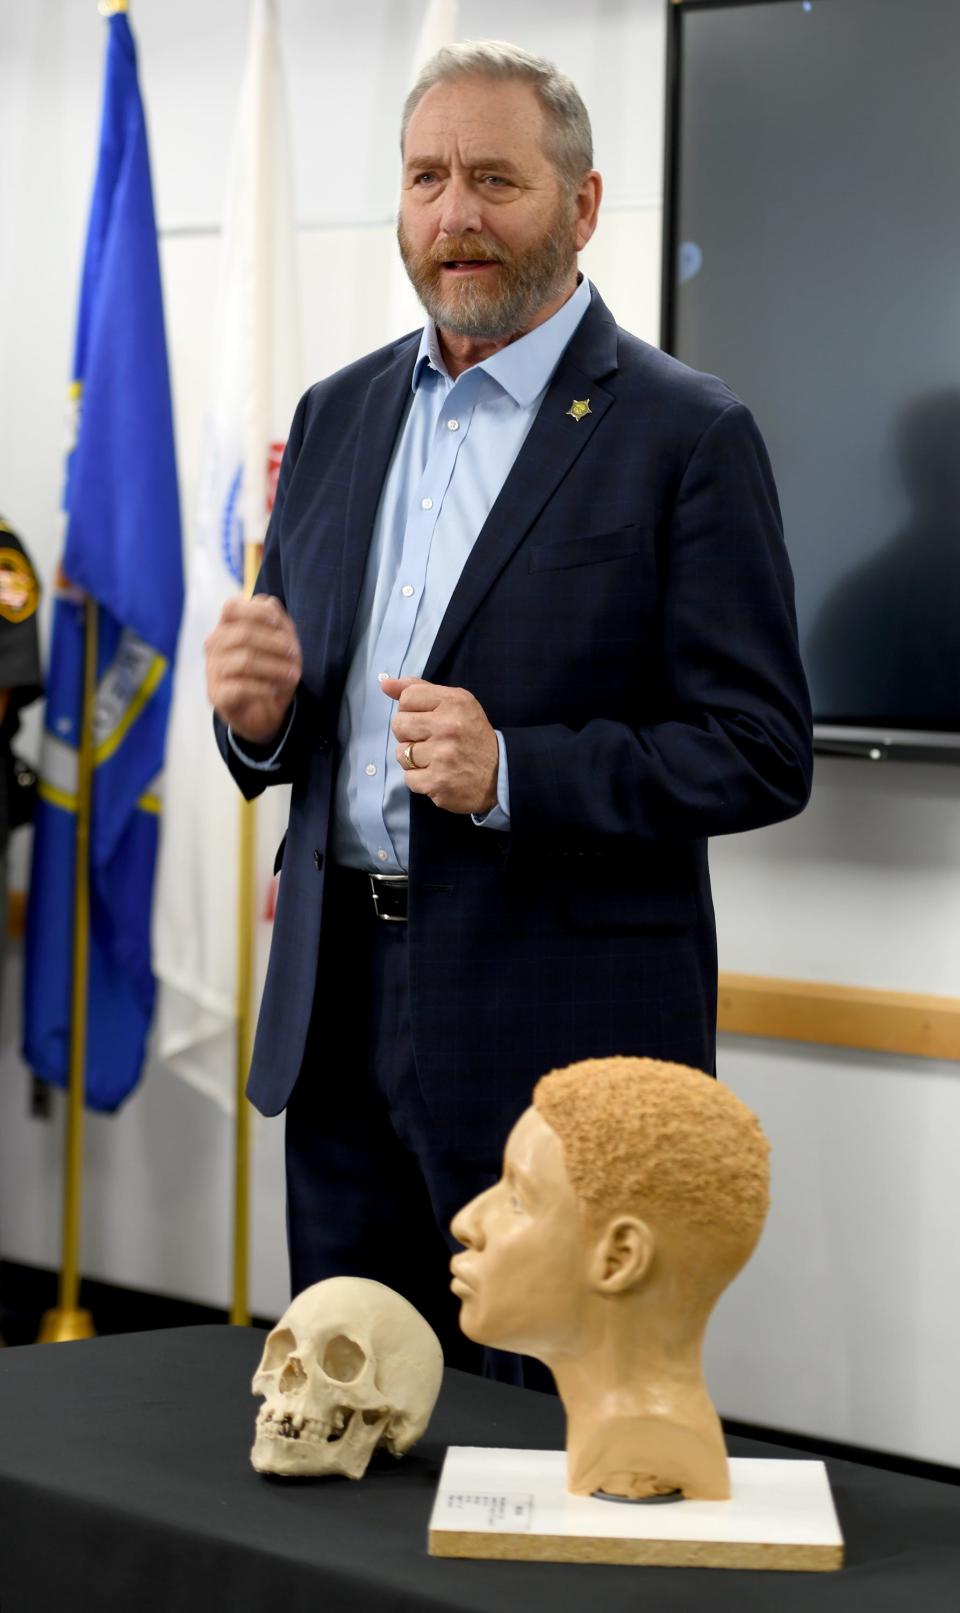 Ohio Attorney General Dave Yost discusses forensic reconstruction technology the Bureau of Criminal Investigation used to create a model of an unidentified man whose remains were found in Canton Township in 2001. The reconstruction was unveiled during a press conference at the Stark County Sheriff's Office on Thursday.